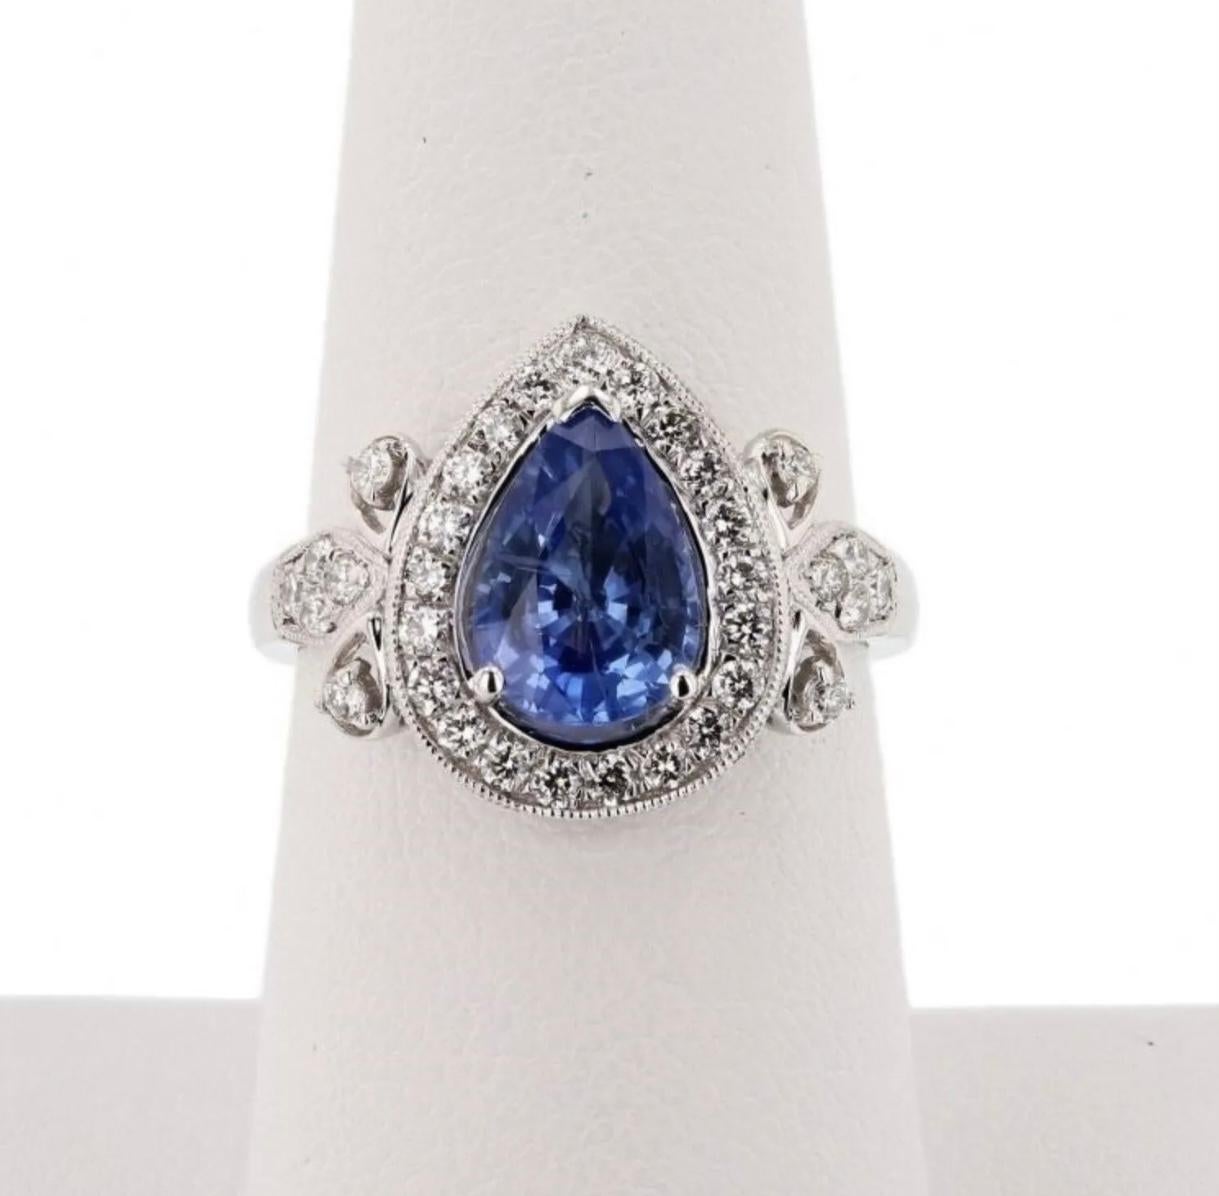 Authentic Platinum 2.02 Ct Sapphire & Diamond Ring Appraisal Inc In Excellent Condition For Sale In Perry, FL